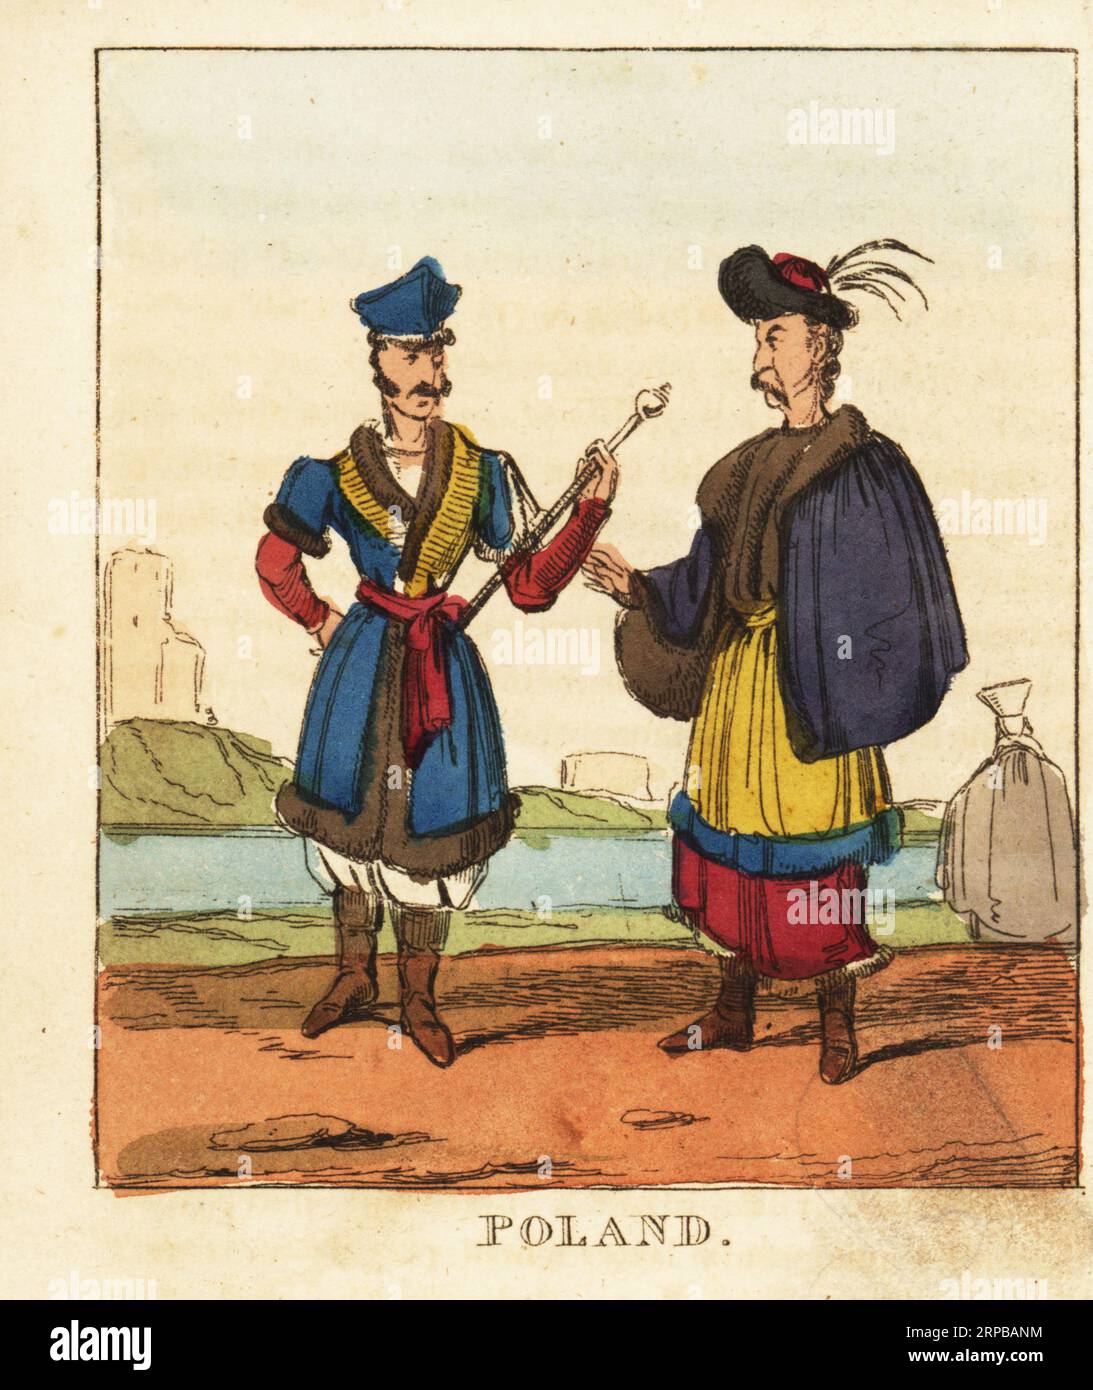 Costumes of Poland, 19th century. Man in shako hat, fur lined coat, sash belt, pantaloons and boots. Another man in plumed hat, fur cape and robes. Handcoloured copperplate engraving from The World in Miniature, or Panorama of the Costumes, Manners & Customs of All Nations, John Bysh, London, 1825. Stock Photo